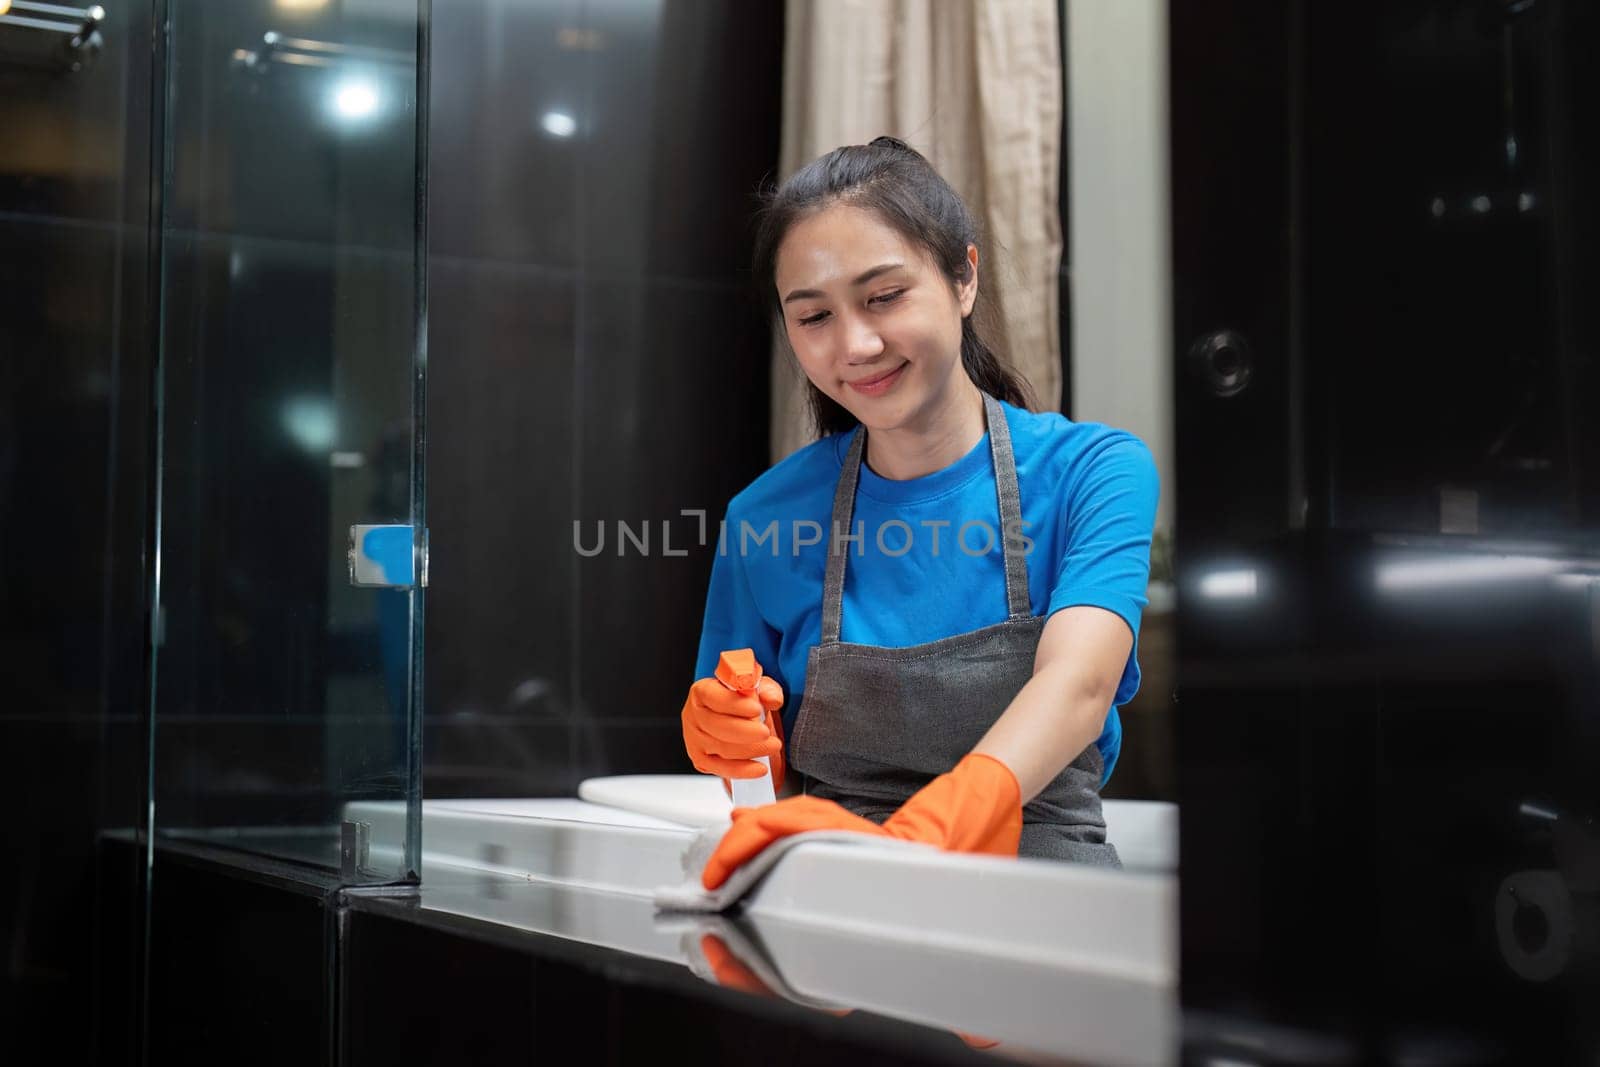 Professional cleaning service company employee in rubber gloves cleaning and detergent spray in bathroom by nateemee